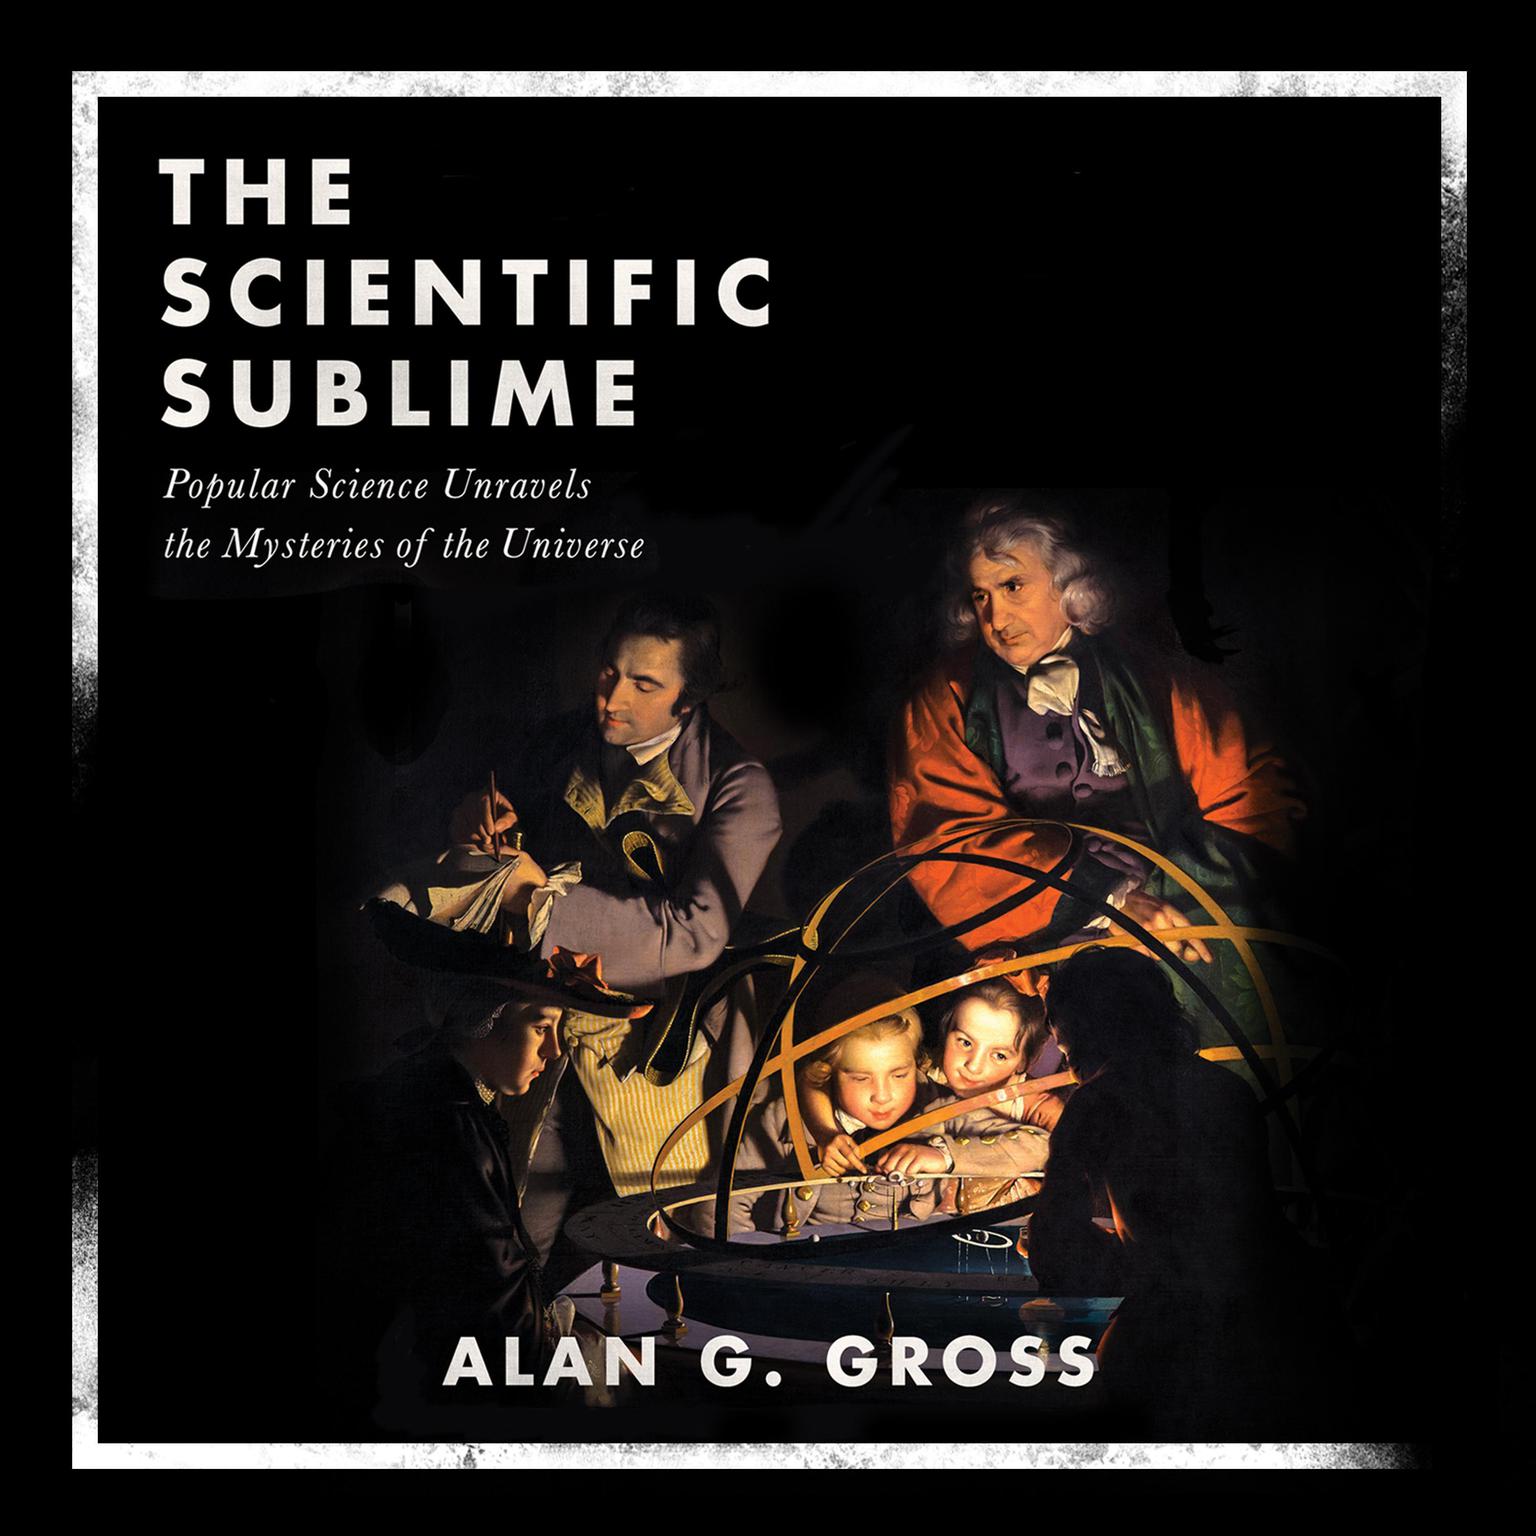 The Scientific Sublime: Popular Science Unravels the Mysteries of the Universe Audiobook, by Alan G. Gross